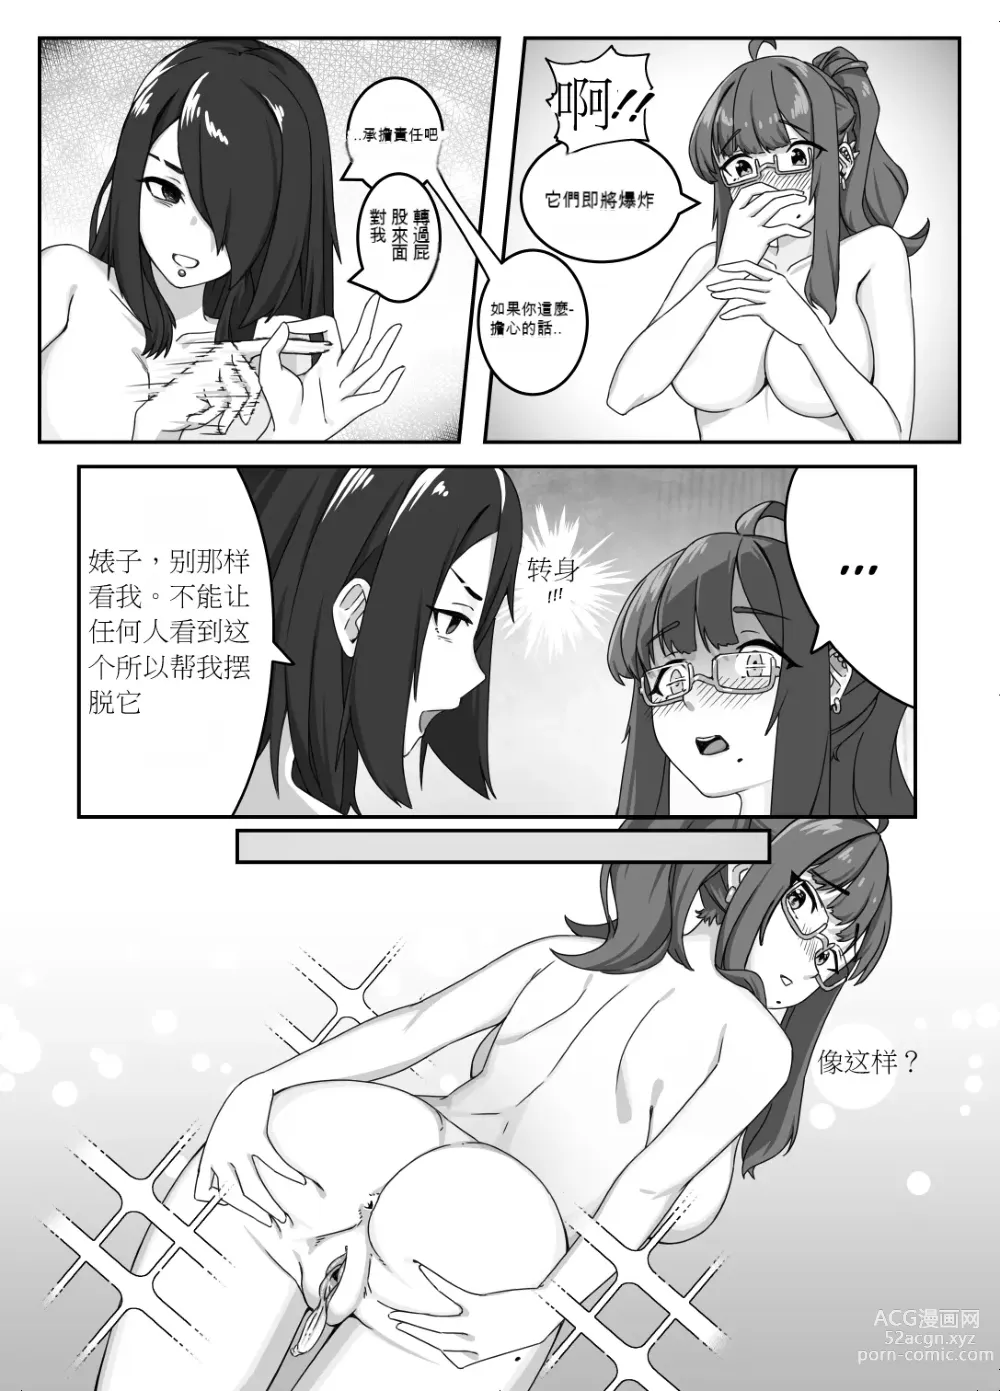 Page 25 of doujinshi Masturbation with a Giant Dick, Lets have fun!